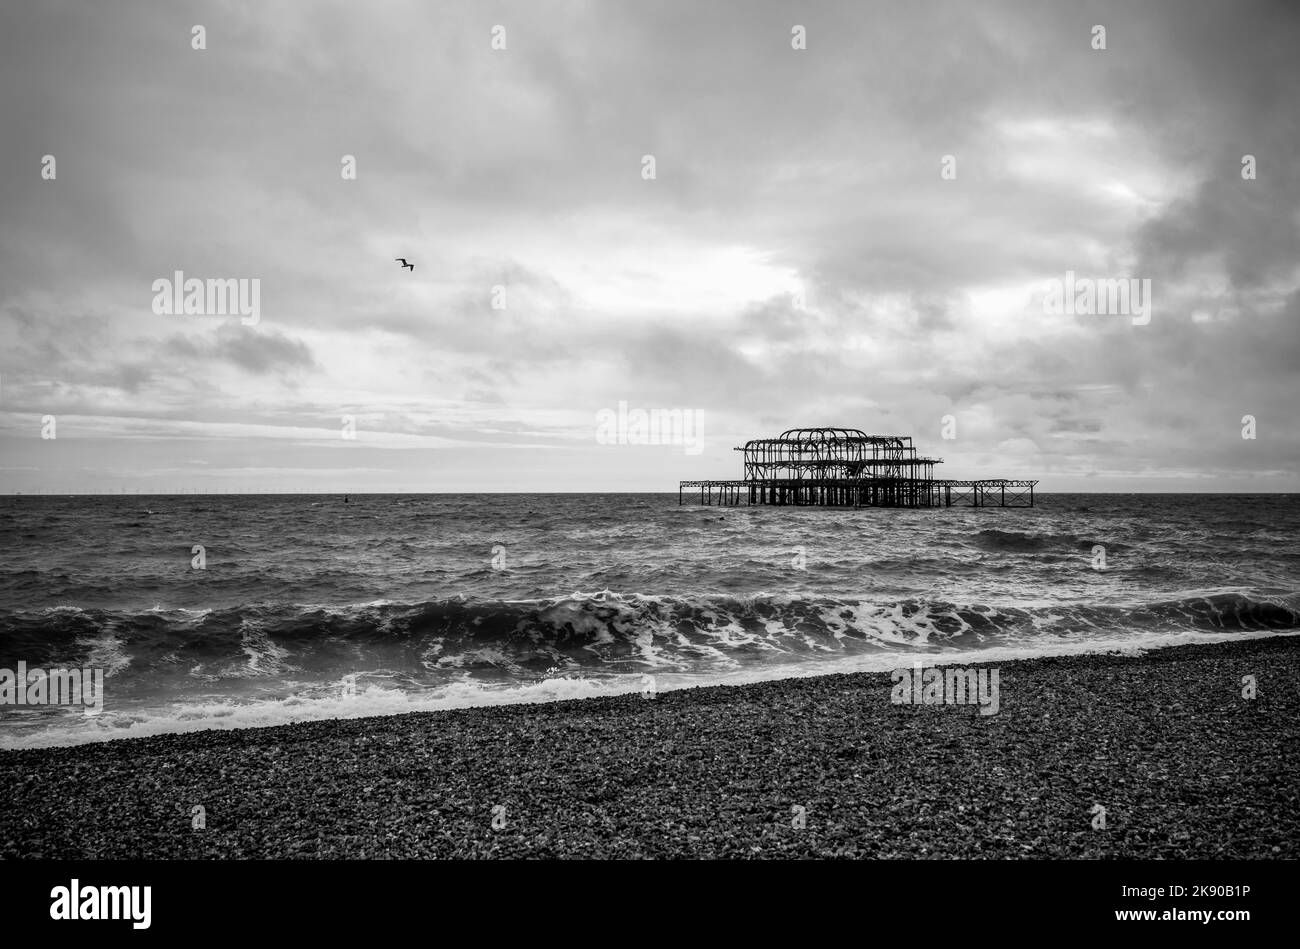 The remains of West Pier in Brighton during stormy weather in black and white, Brighton beach, East Sussex, England, UK Stock Photo